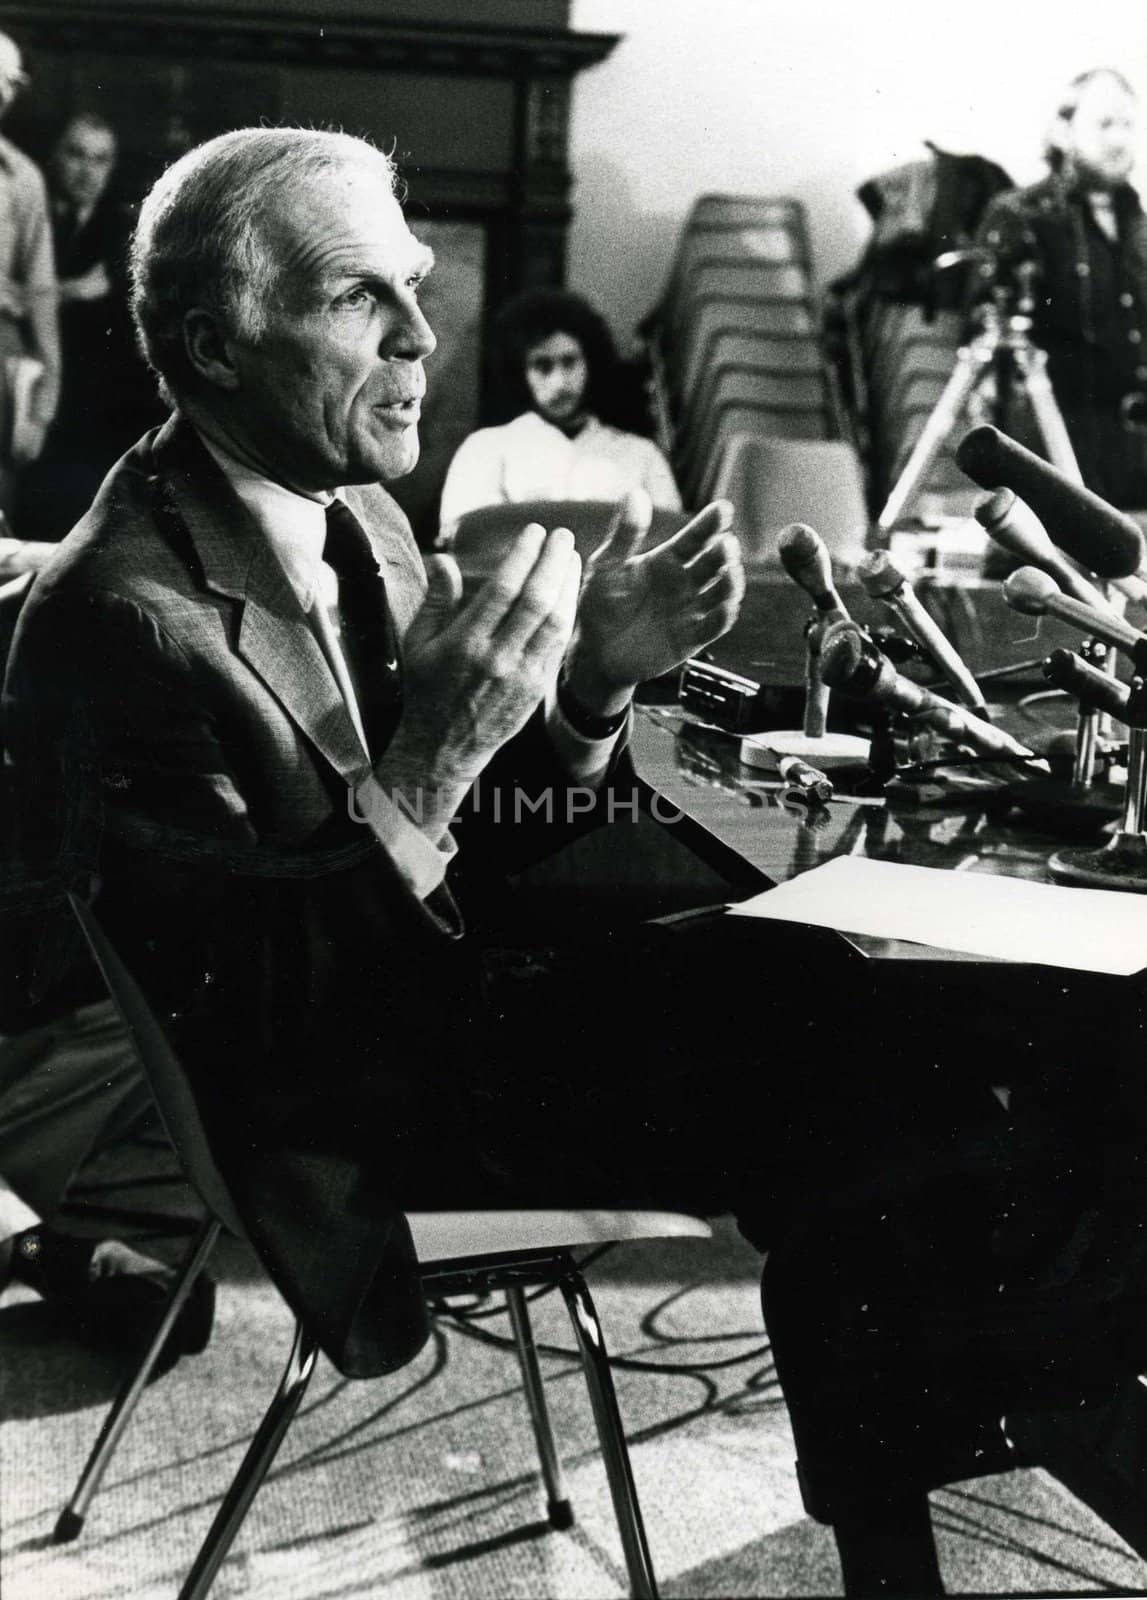 Former Boston Mayor Kevin White in 1979 at a meeting in City hall 